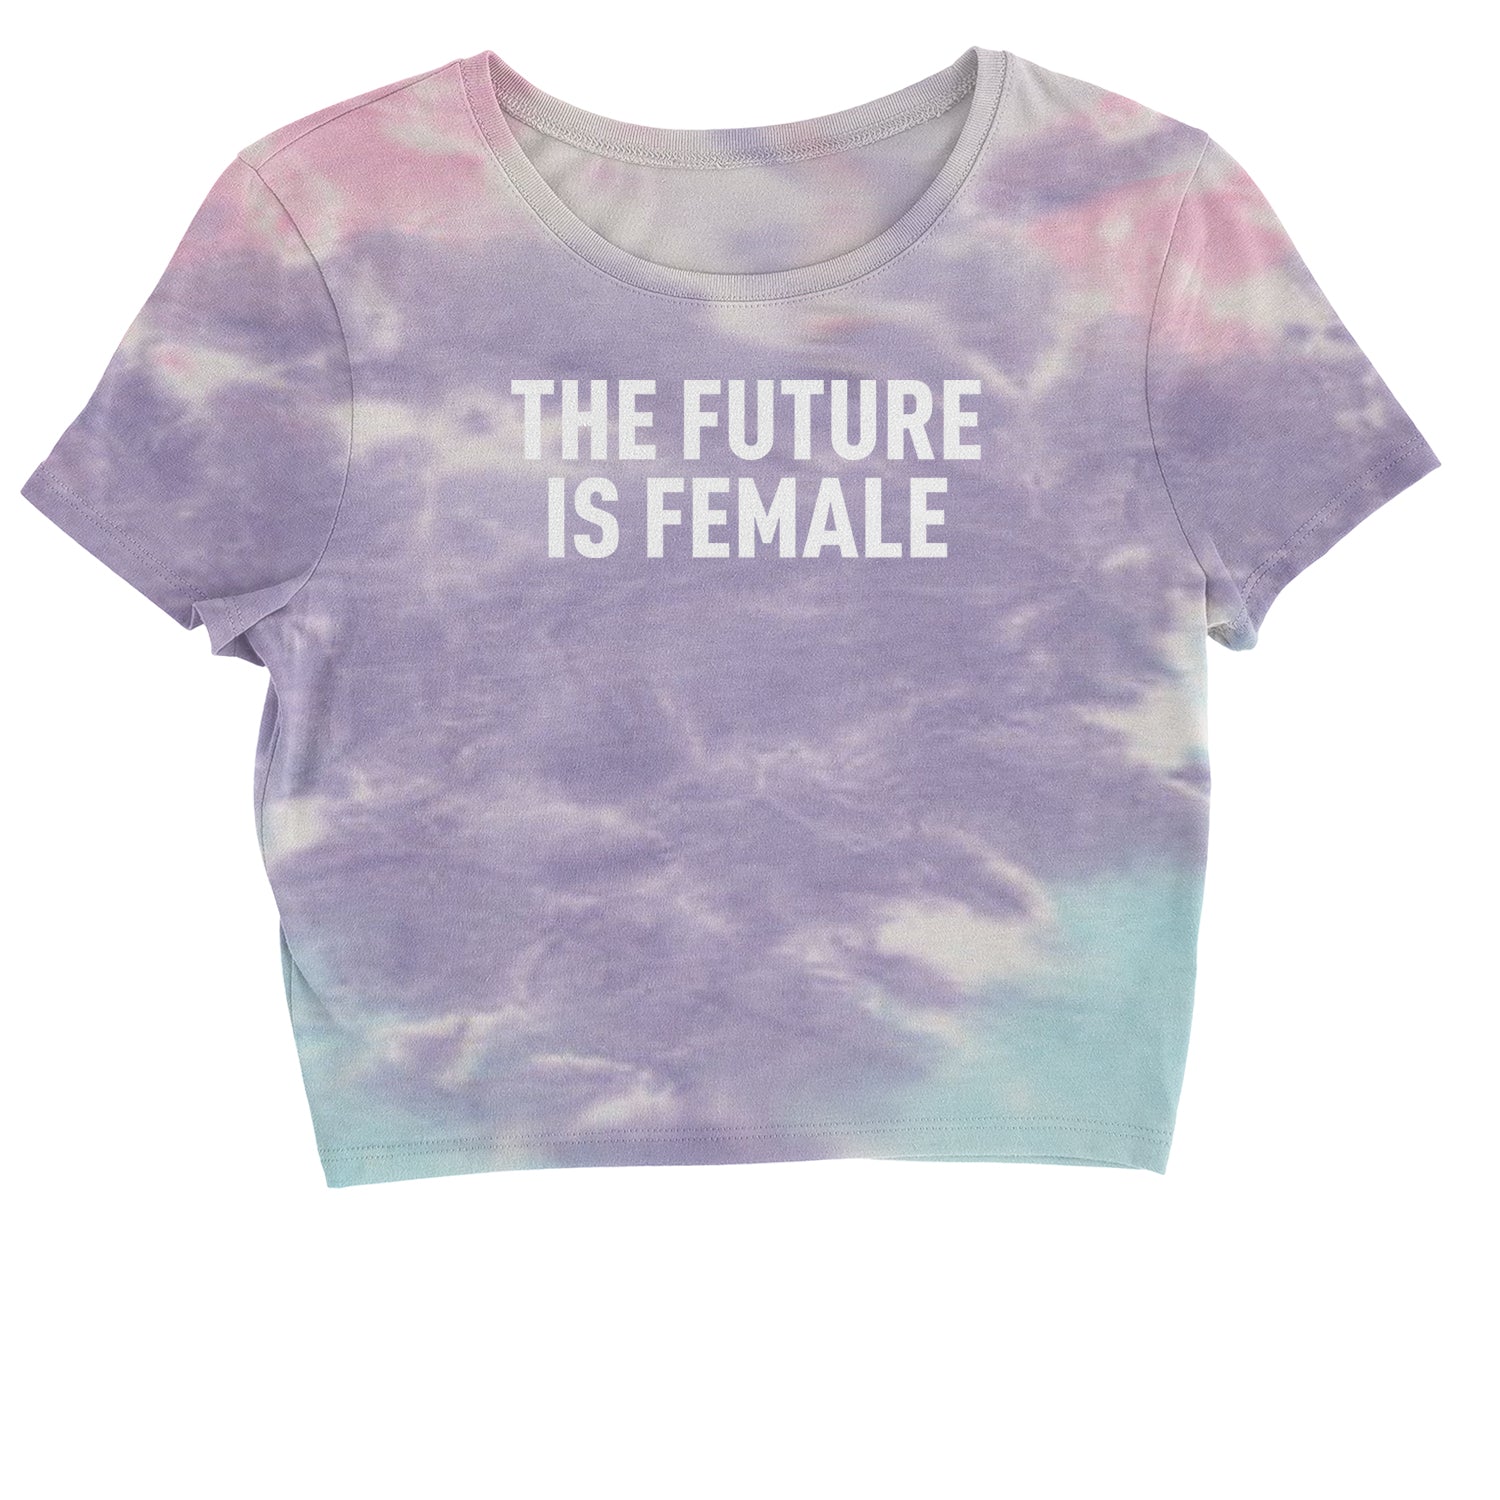 The Future Is Female Feminism Cropped T-Shirt female, feminism, feminist, femme, future, is, liberation, suffrage, the by Expression Tees